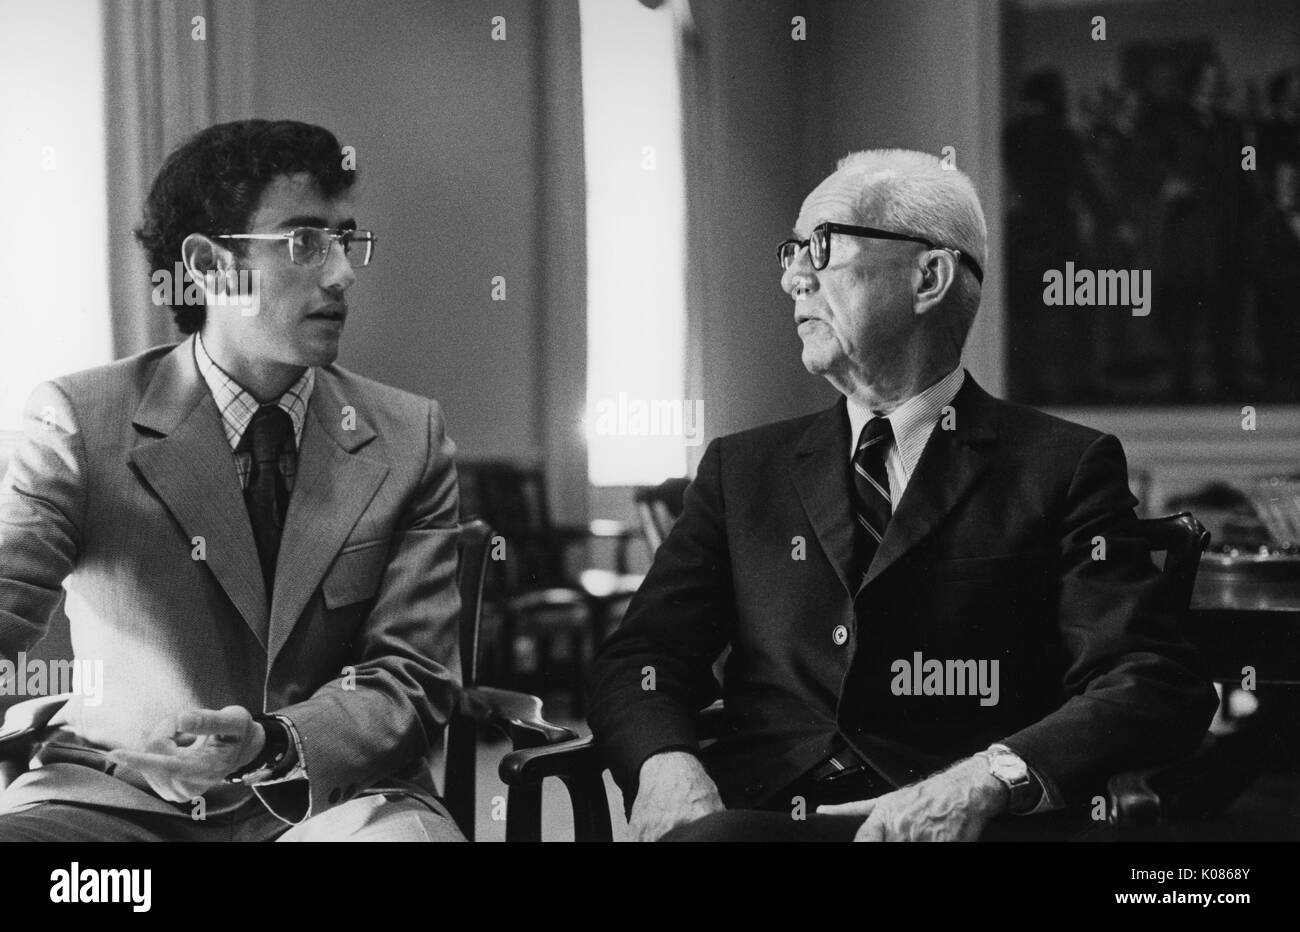 Half-length portrait of architect Buckminster Fuller speaking with another man, Fuller wearing a dark suit with a white shirt and a striped tie, wearing glasses, seated in a wooden chair and facing the other man, 1970. Stock Photo